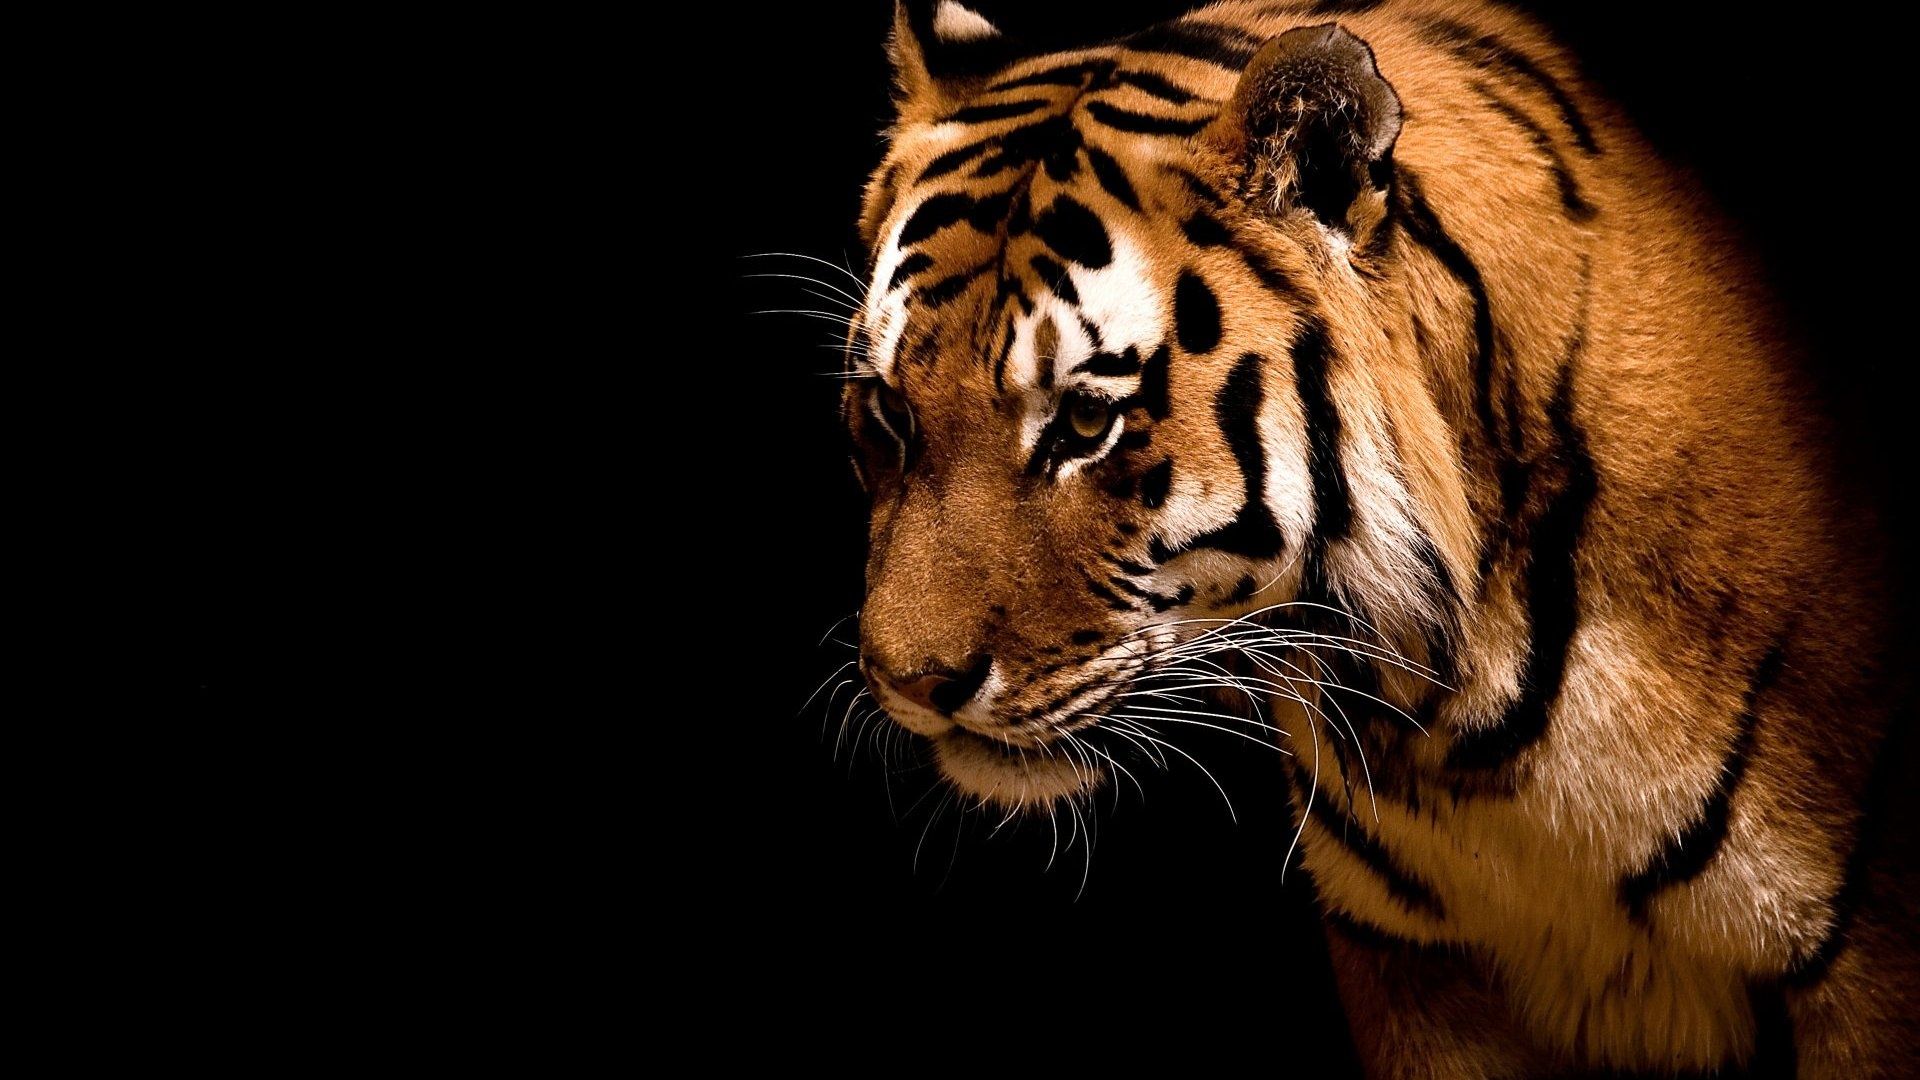 1063 Tiger HD Wallpapers | Backgrounds - Wallpaper Abyss